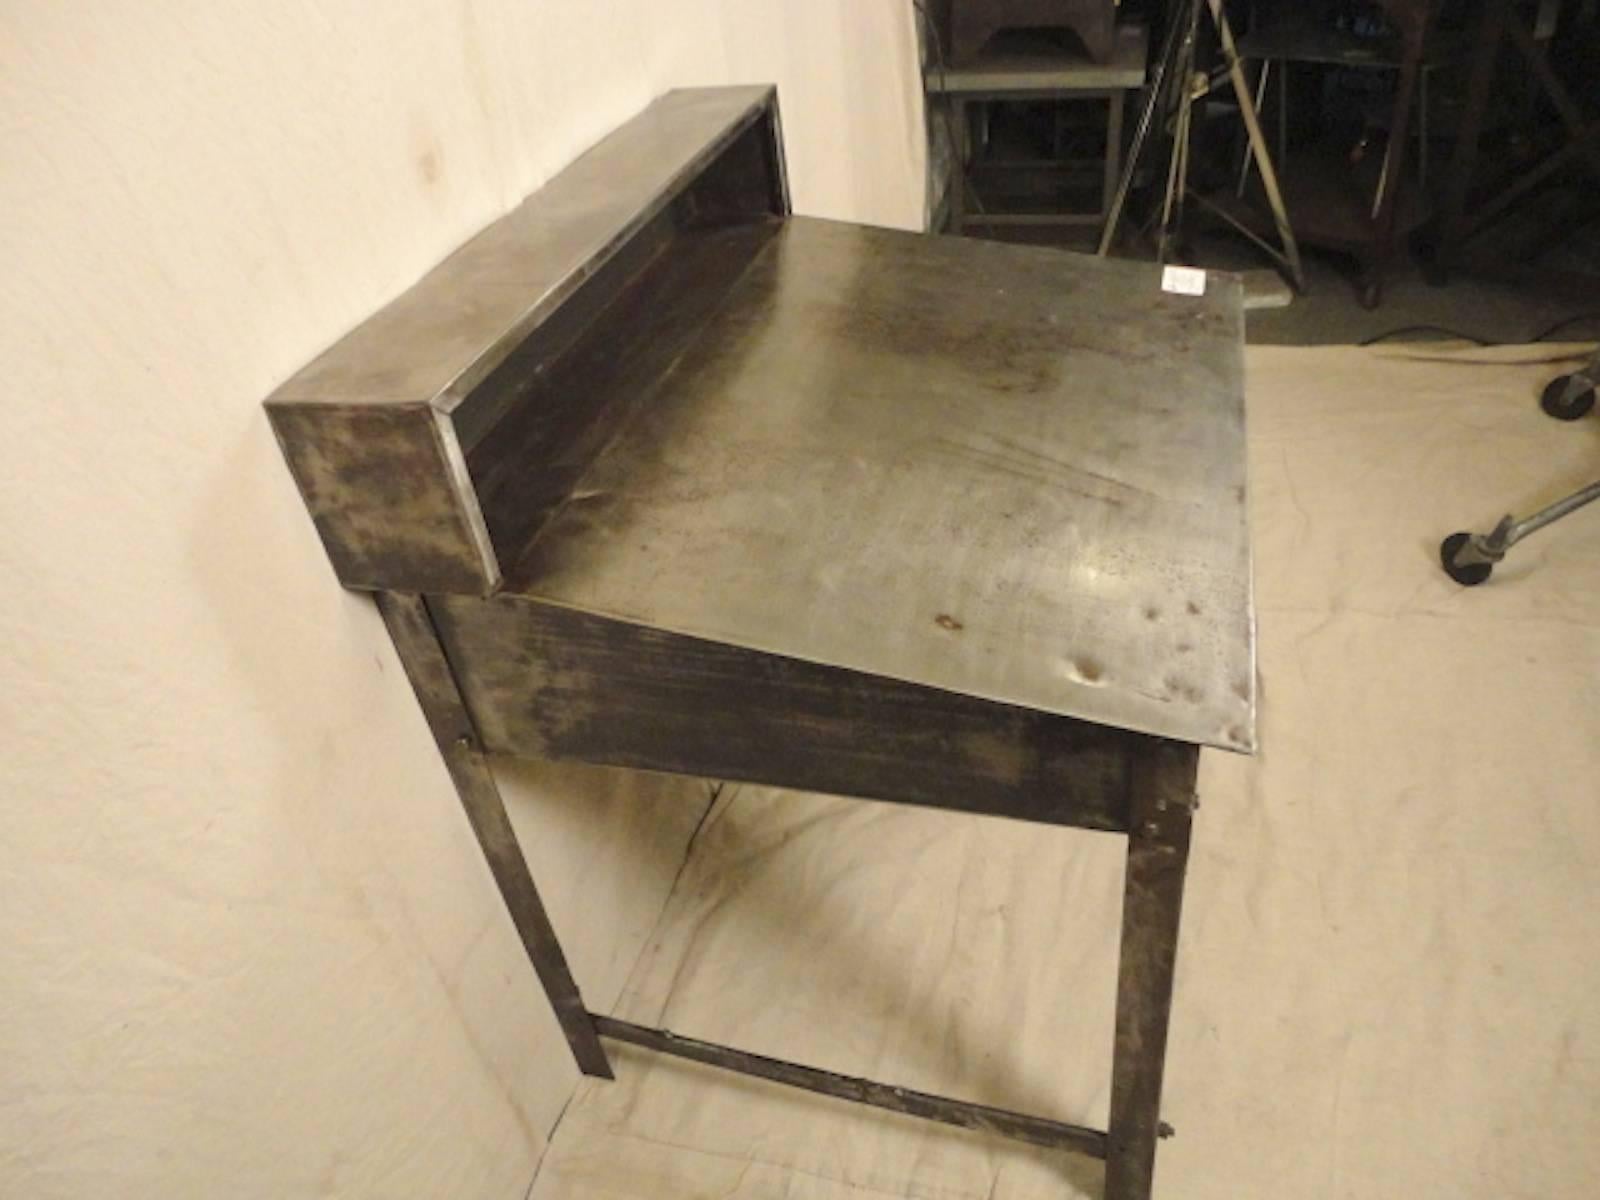 Machine age style Foreman's desk redone in a bare metal style finish. This piece is great for a restaurant, to be used with a drafting stool or standing.

(Please confirm item location NY or NJ with dealer).